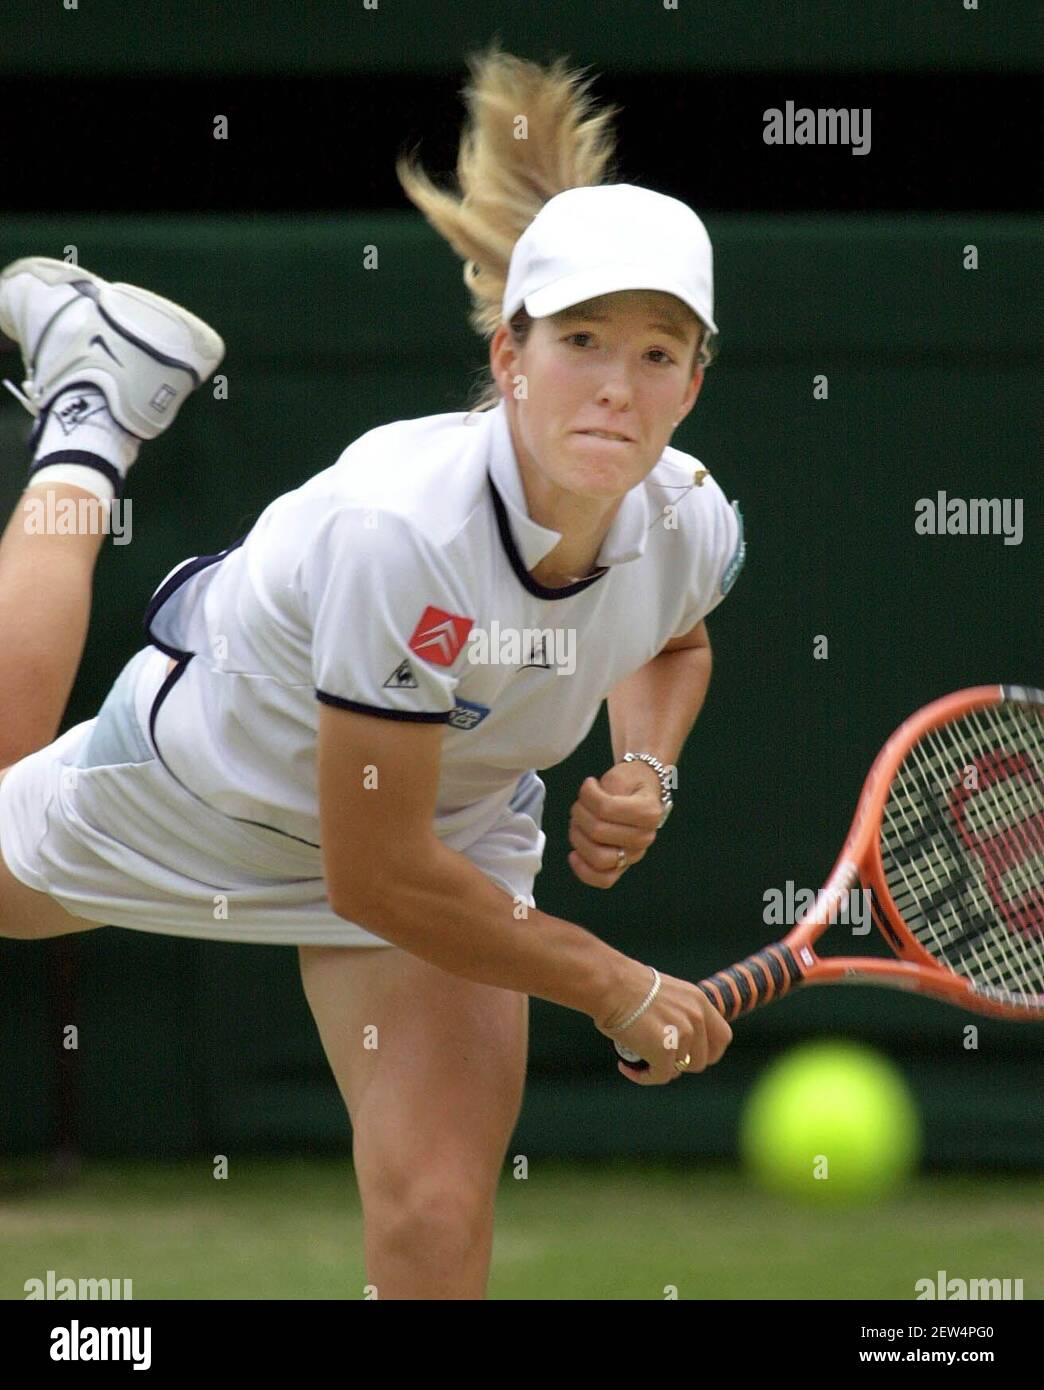 Justine Henin of Belgium  v  Venus Williams of the U.S. during the womens' final at the Wimbledon Championships July 8, 2001. Stock Photo